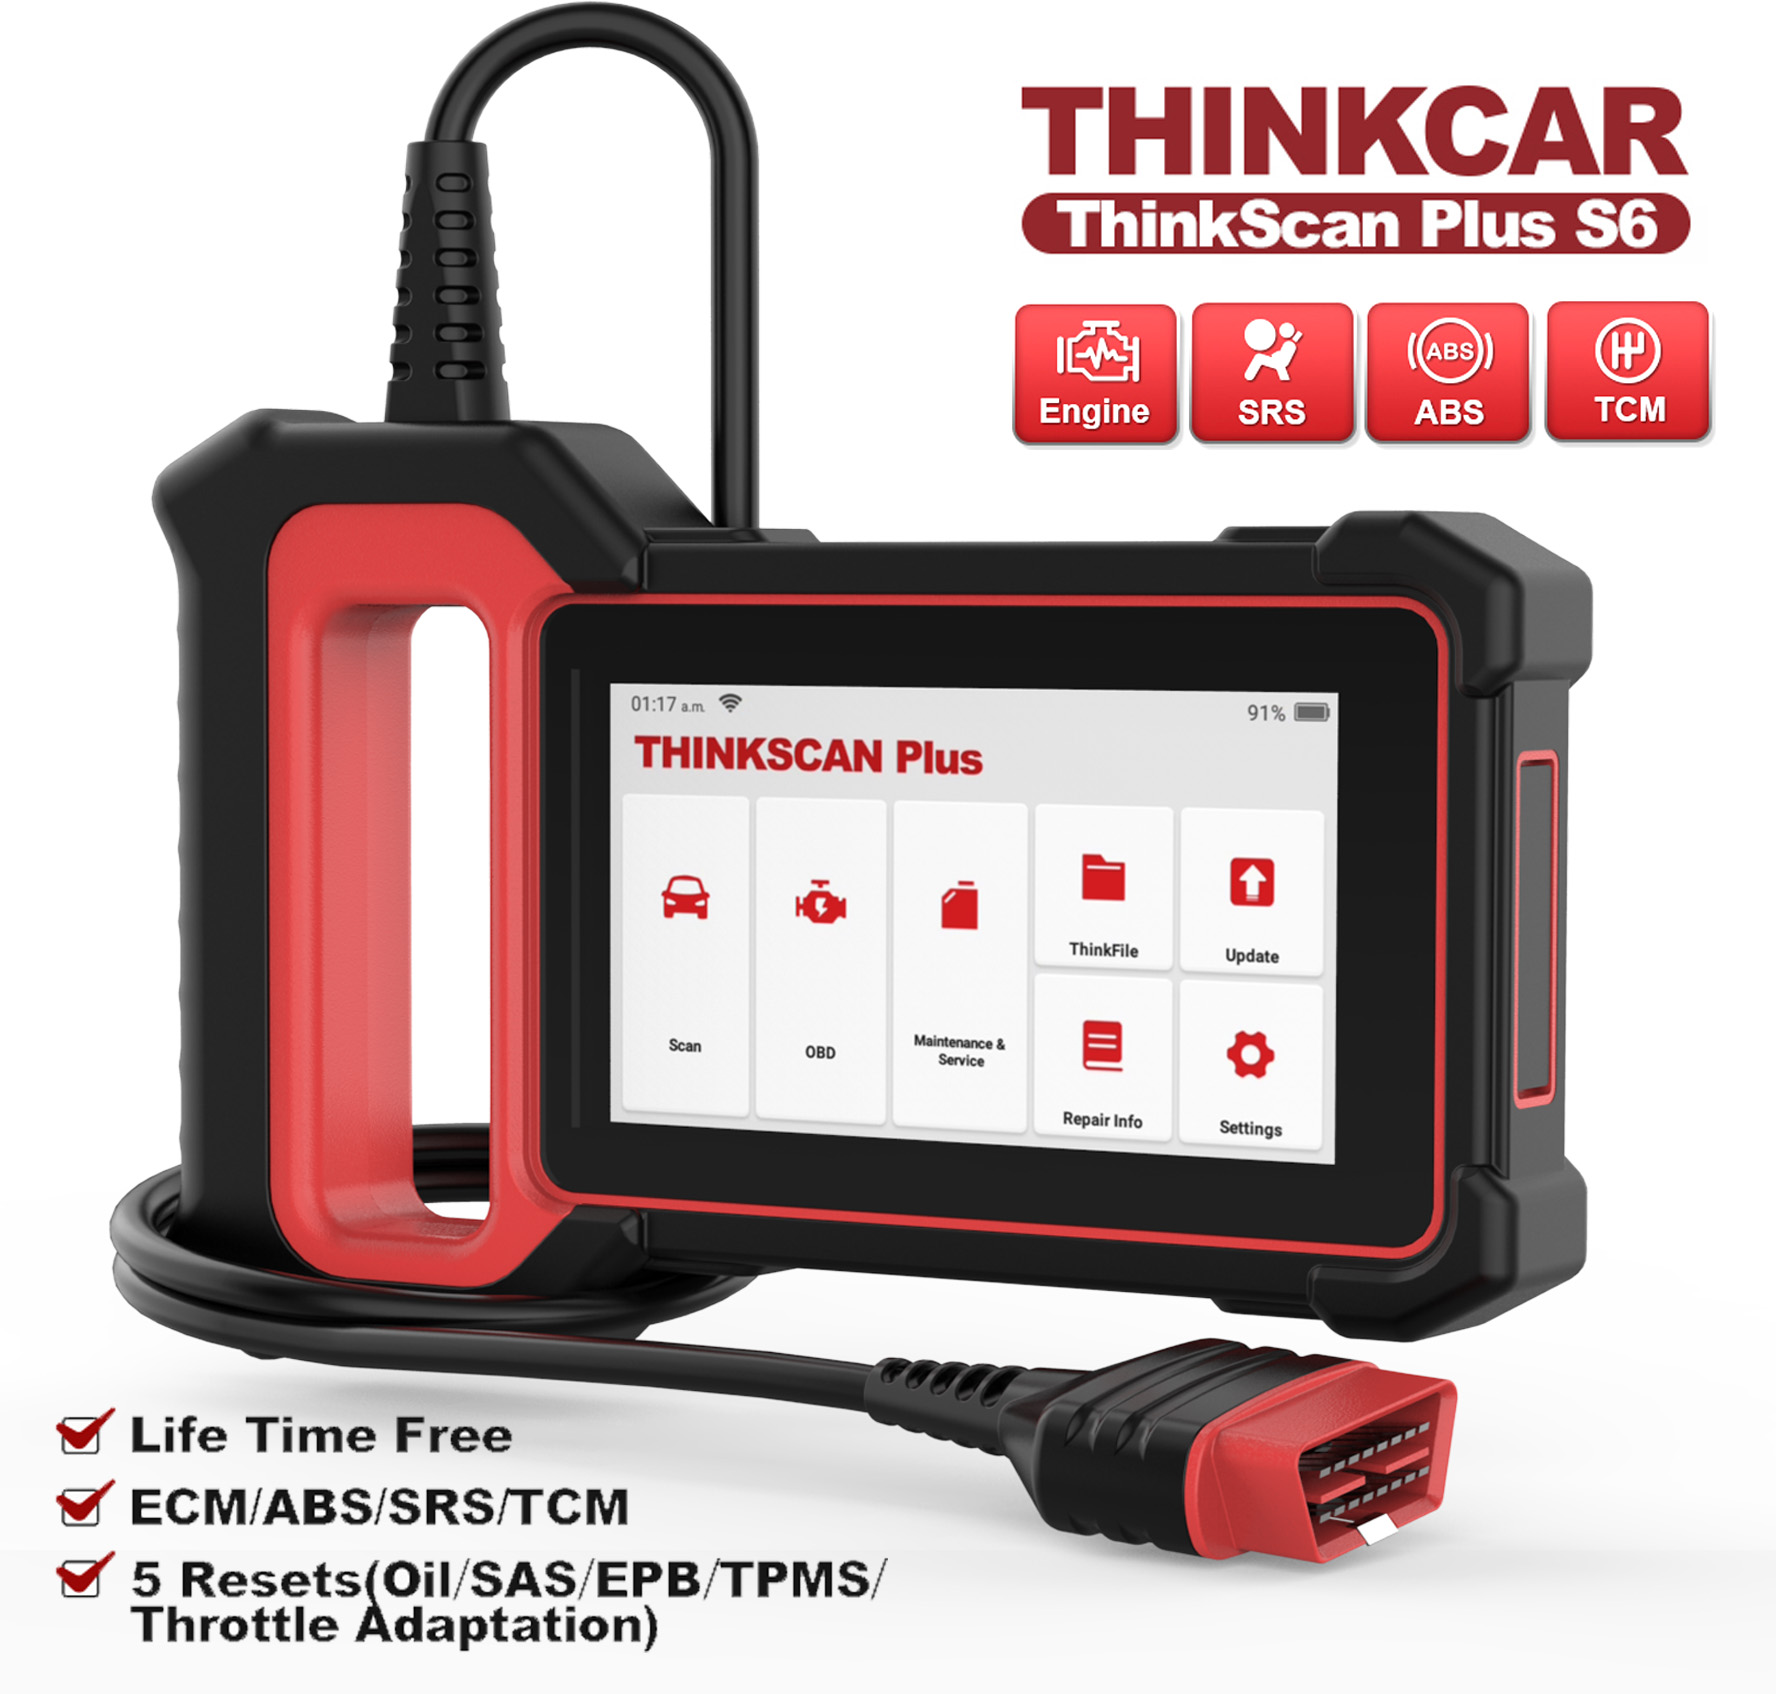 Buy THINKCAR Top Products at Best Prices online